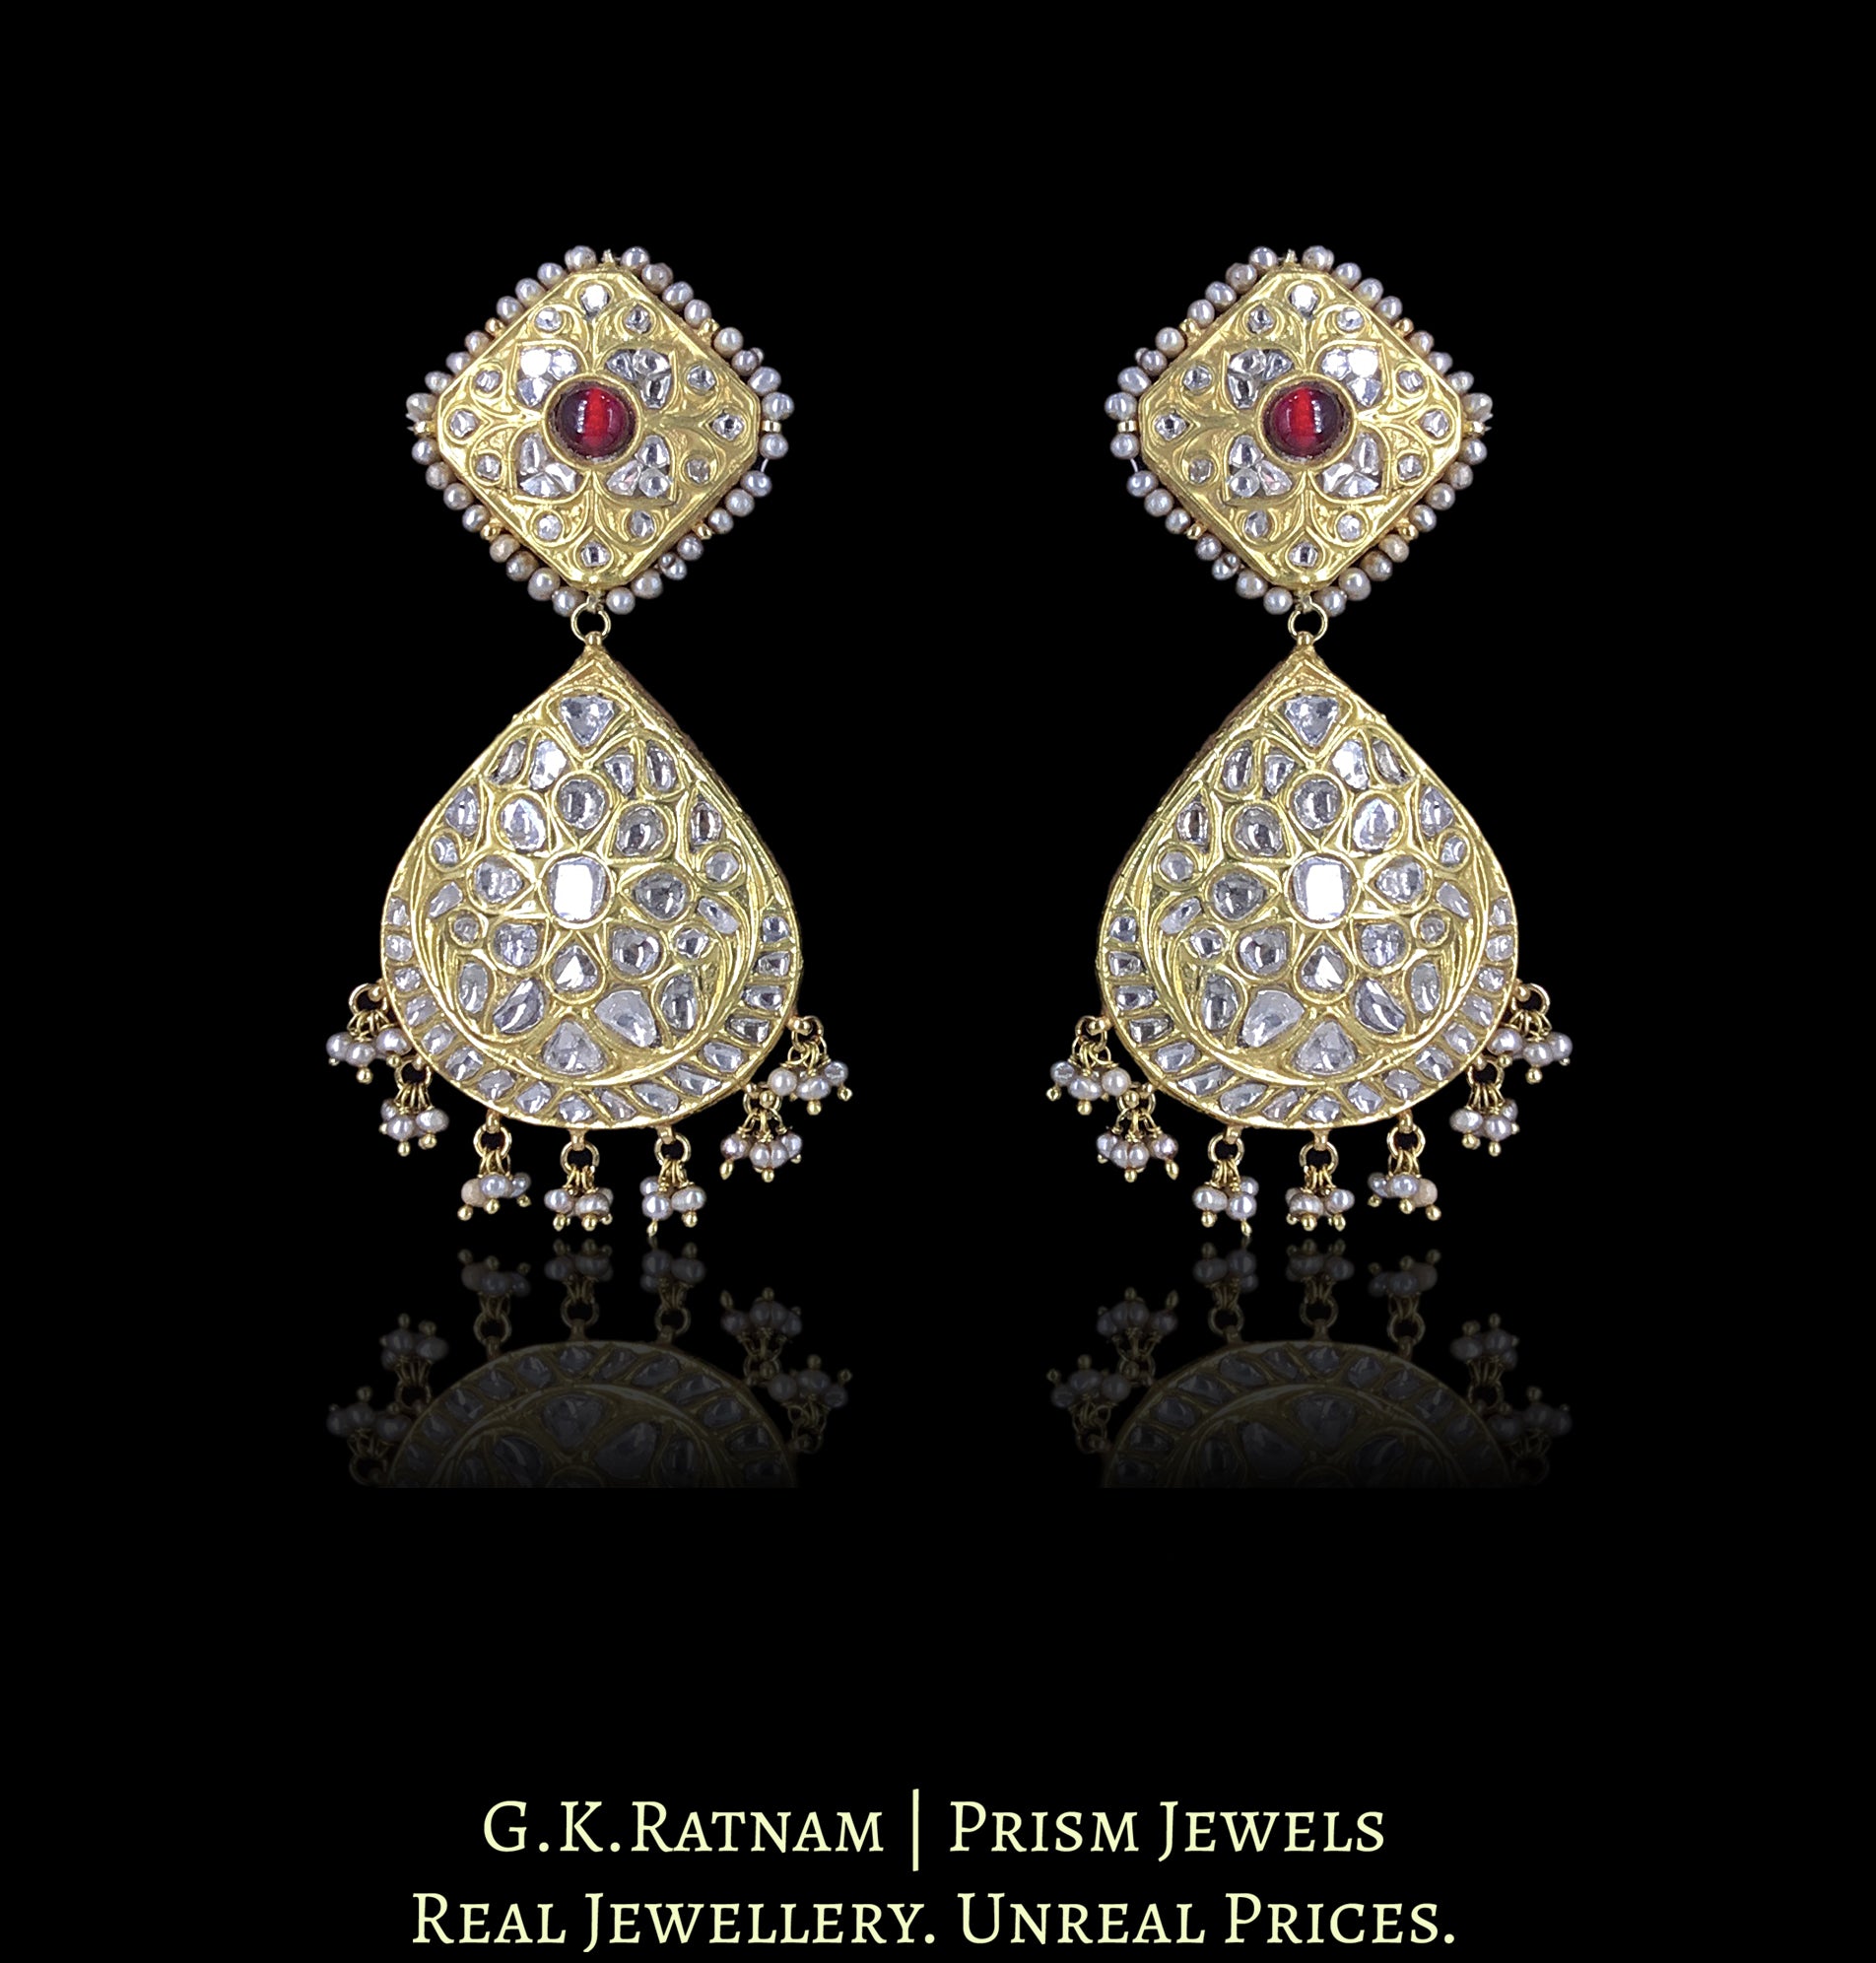 23k Gold and Diamond Polki Necklace Set with Concentric Chand Motifs